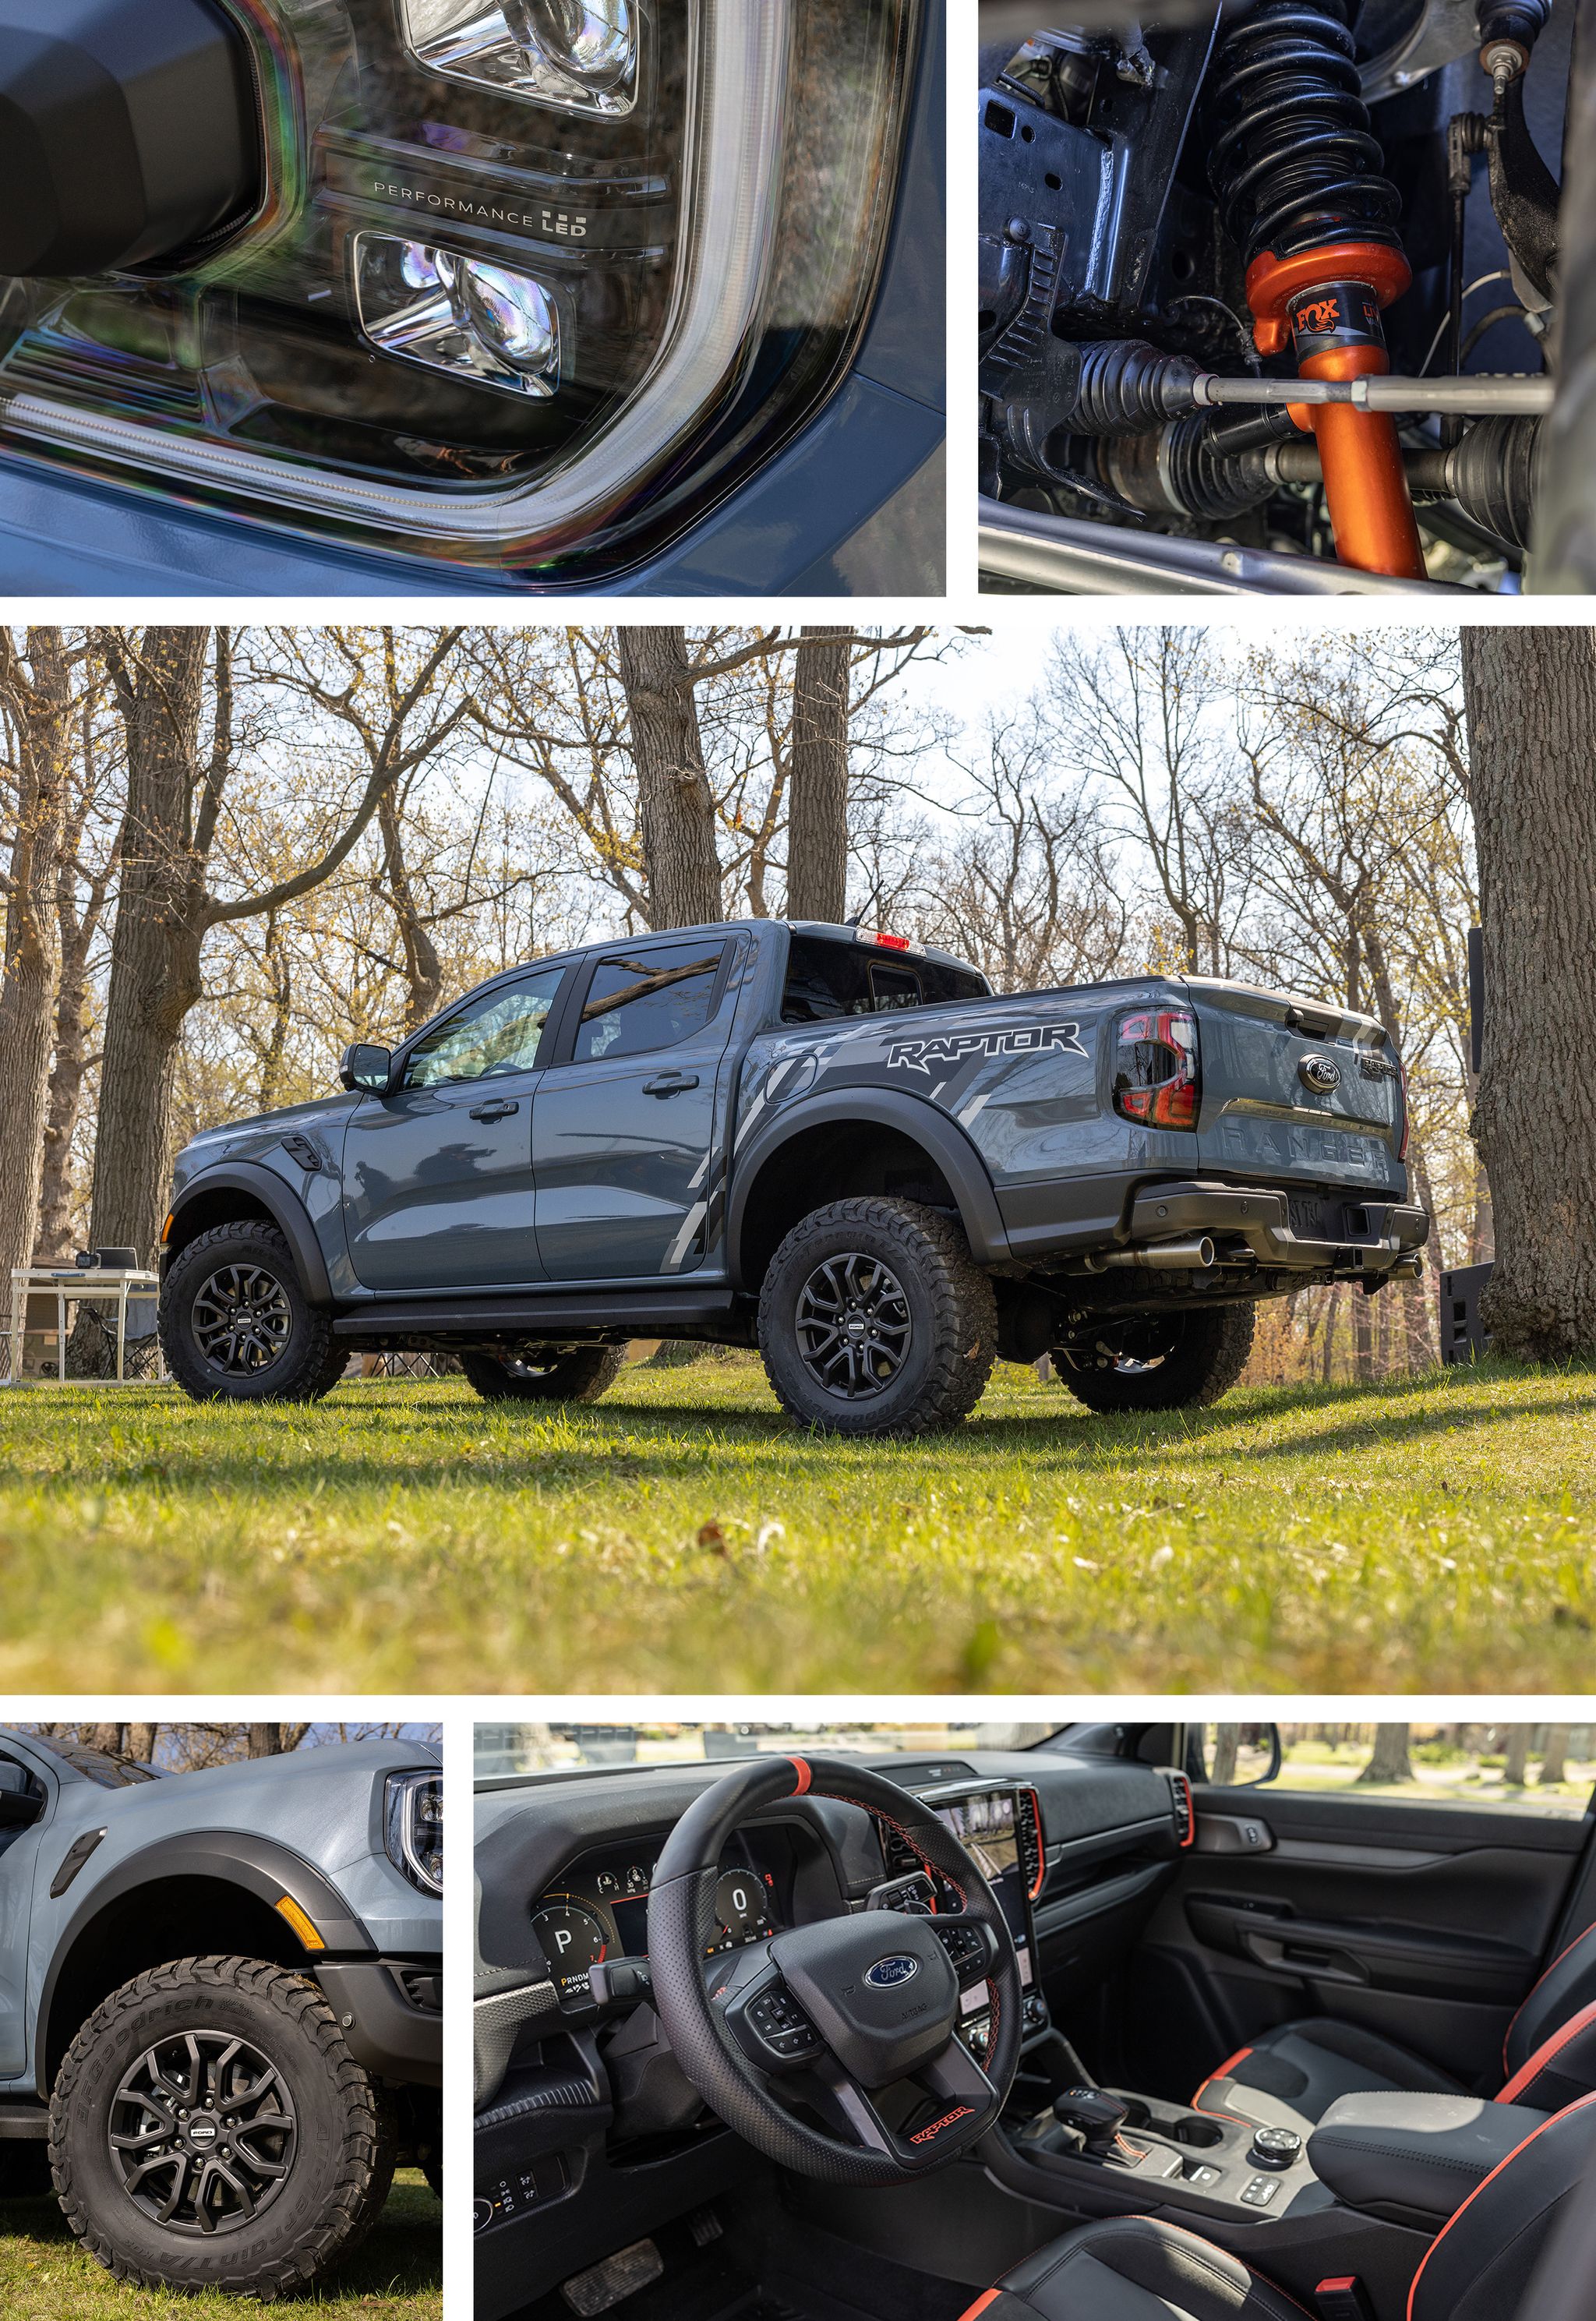 2024 Ford Ranger Raptor Is the Truck We've Been Waiting For